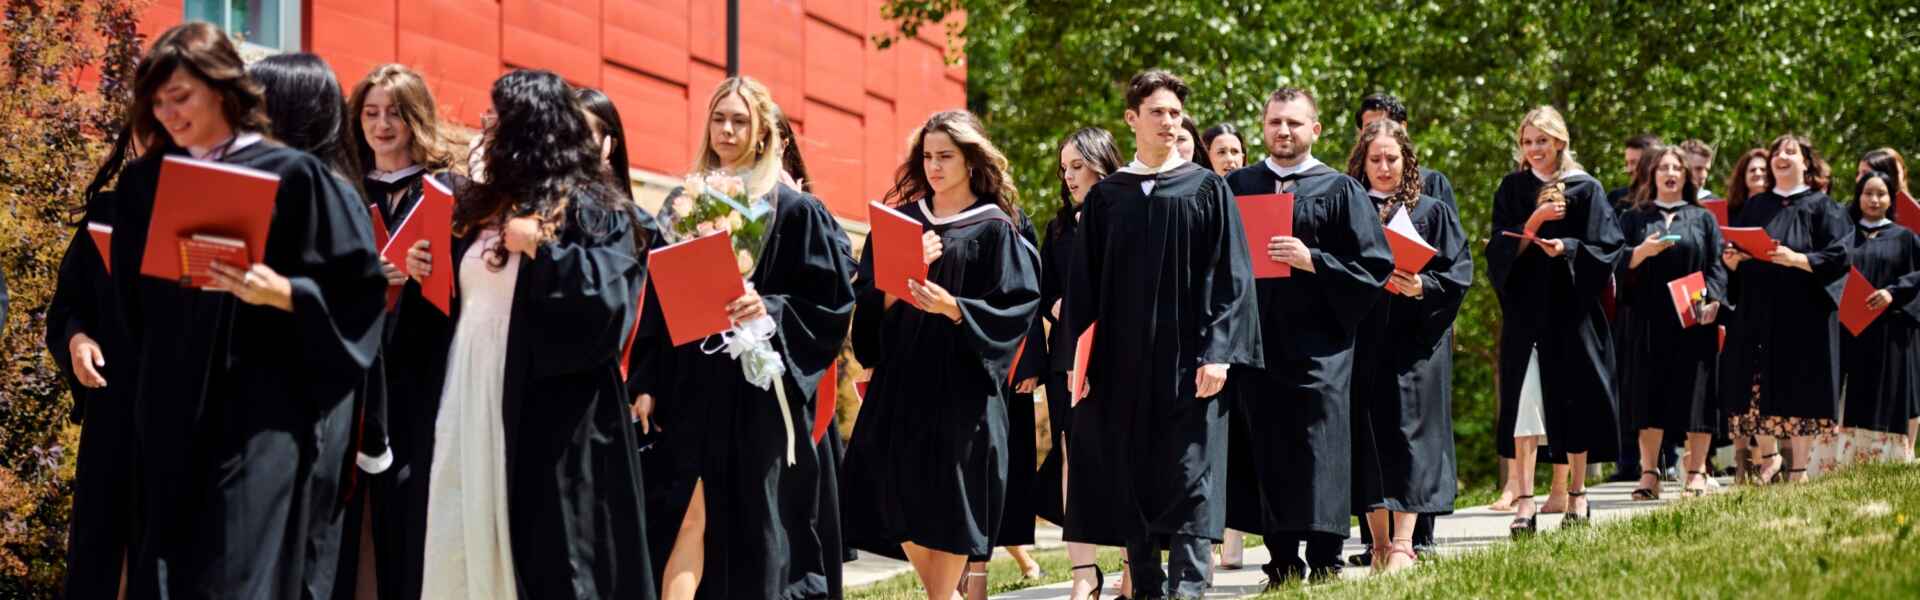 Graduates with degrees walk along an outdoor path after convocation